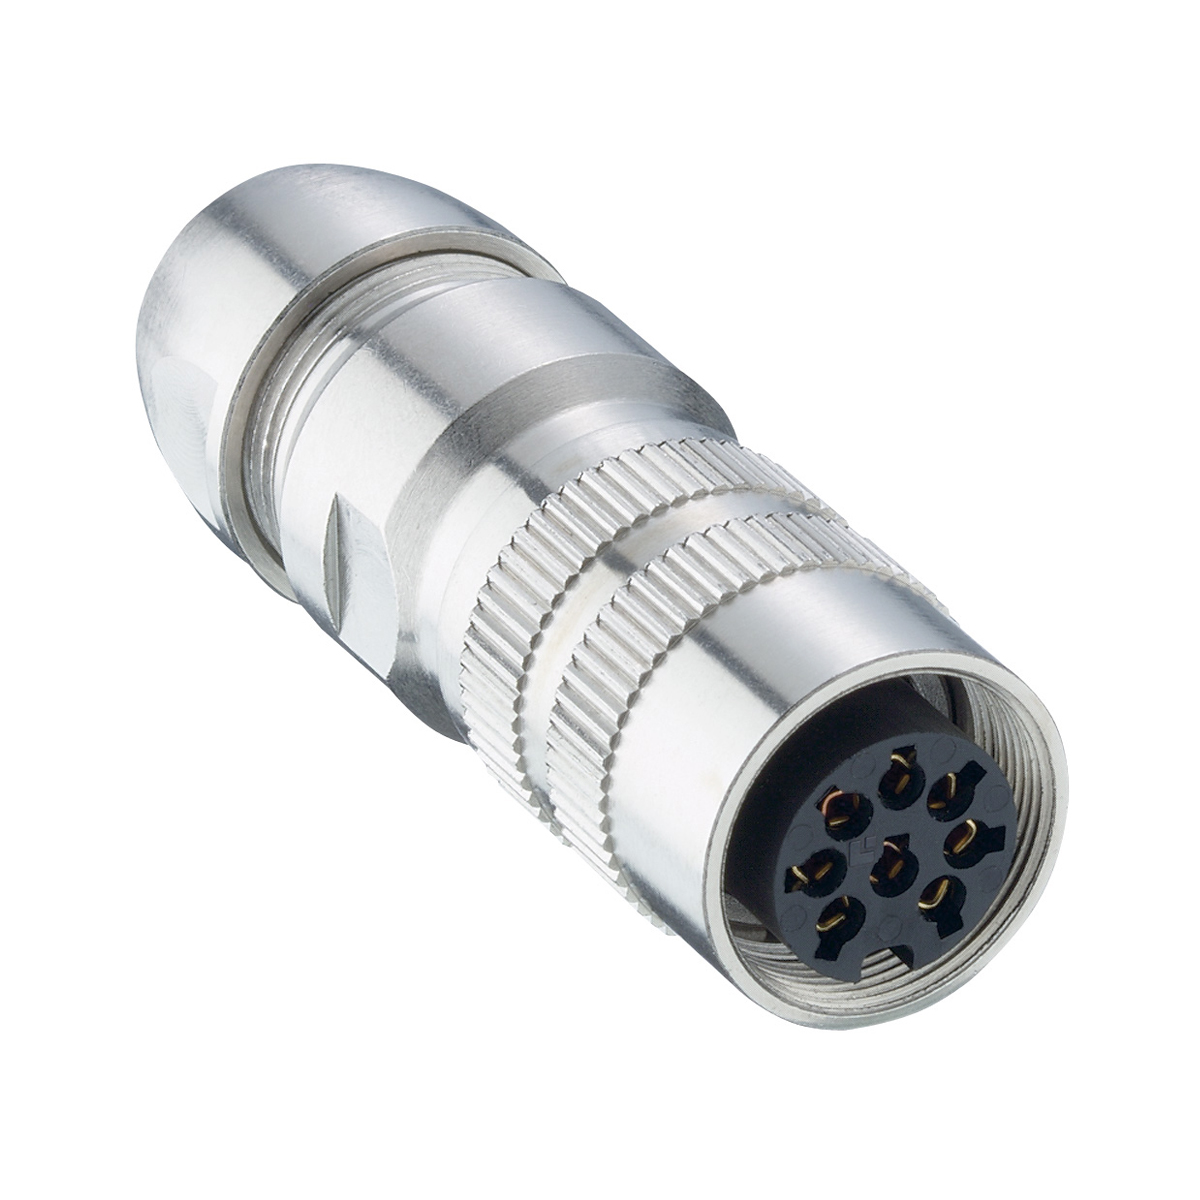 Lumberg: 32200 (Series 03 | Circular connectors with threaded joint M16 acc. to IEC 61076-2-106, IP40/IP68)